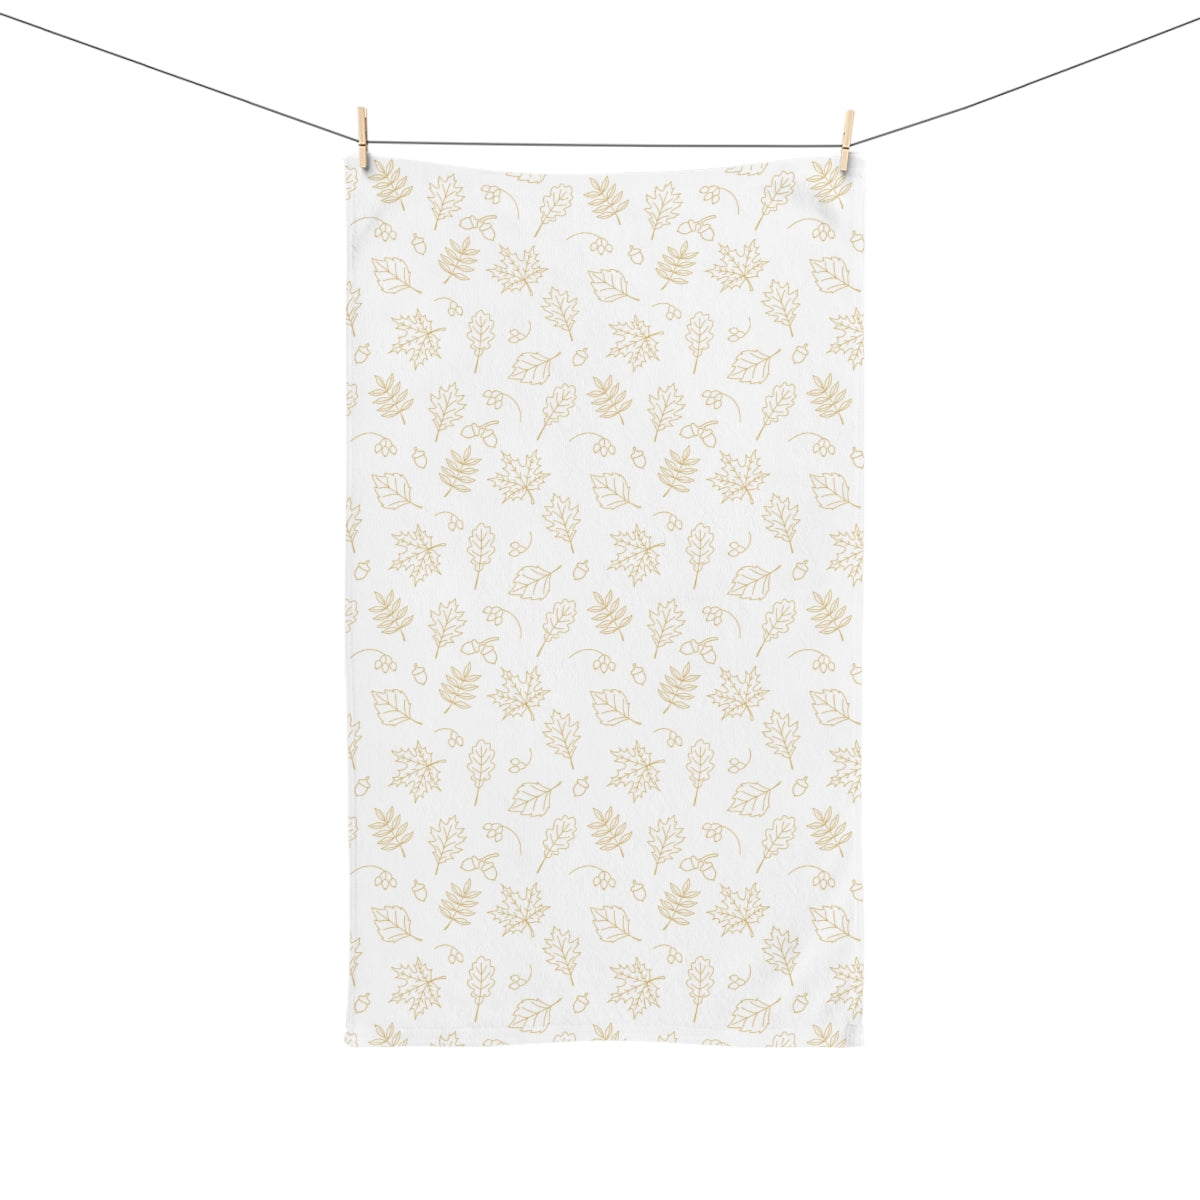 Acorns and Leaves Hand Towel